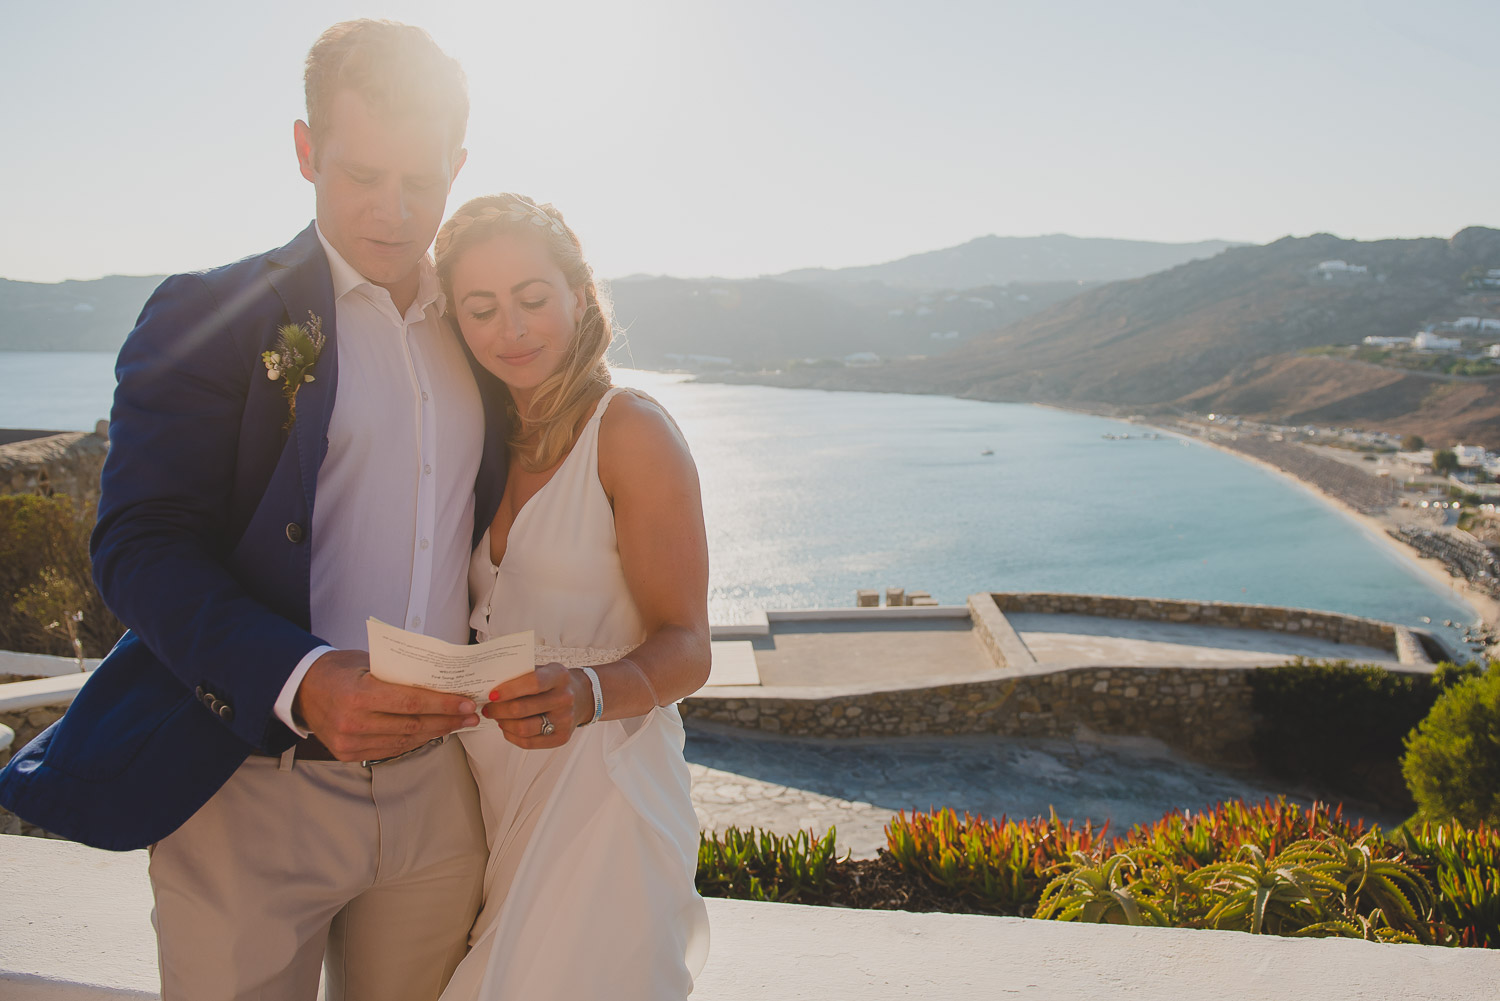 Wedding photographer Mykonos: bride and groom backlit and embraced during Mykonos wedding ceremony with beach views in the background.